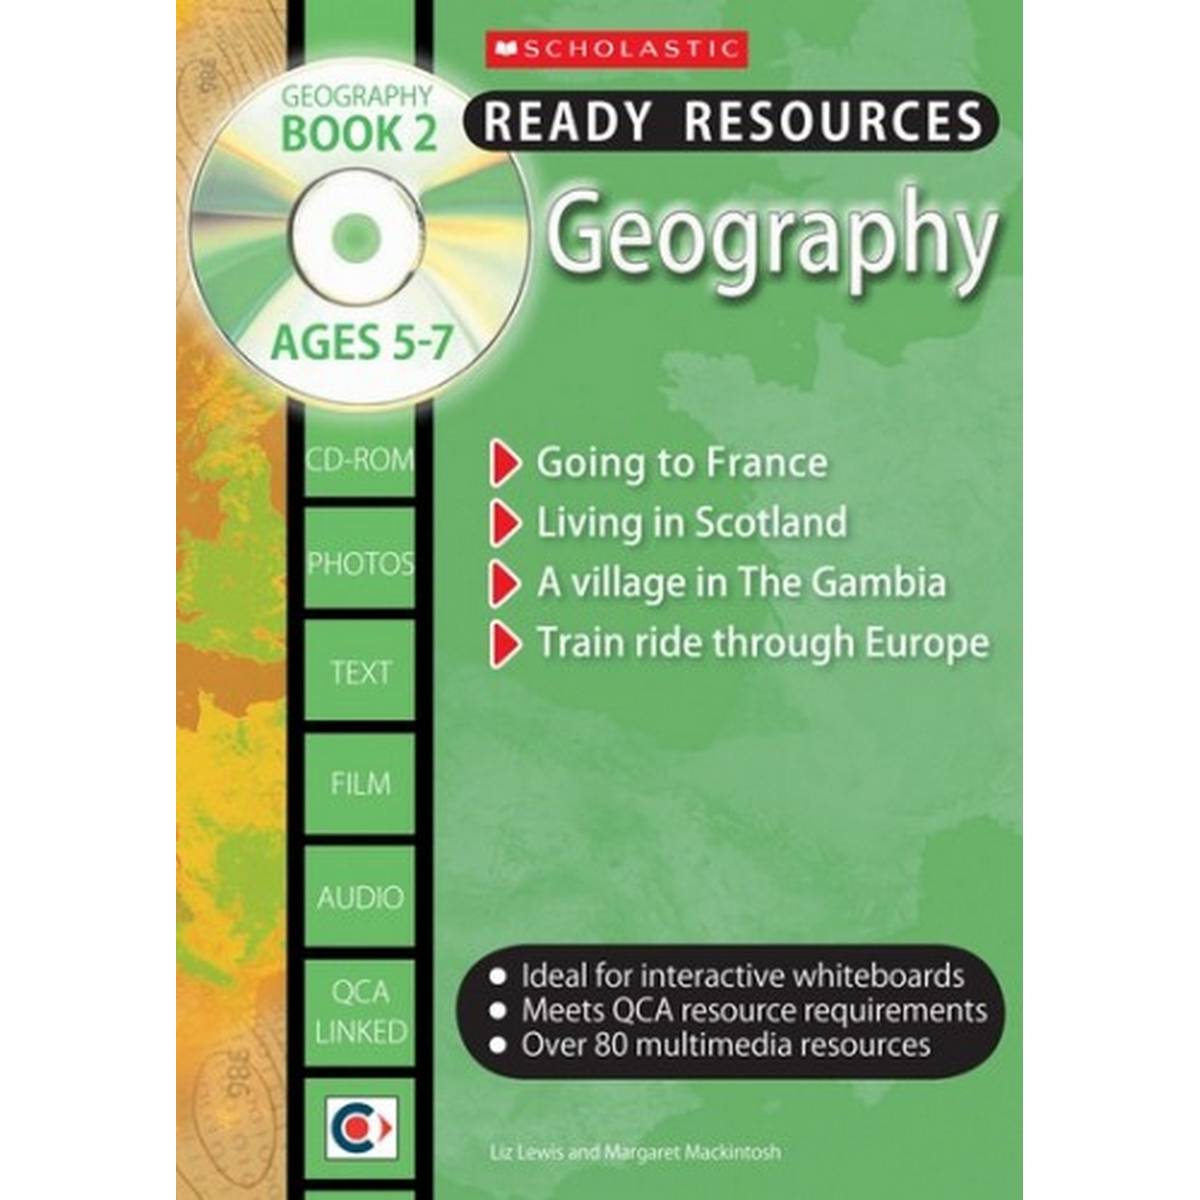 Ready Resources Geography Book 2